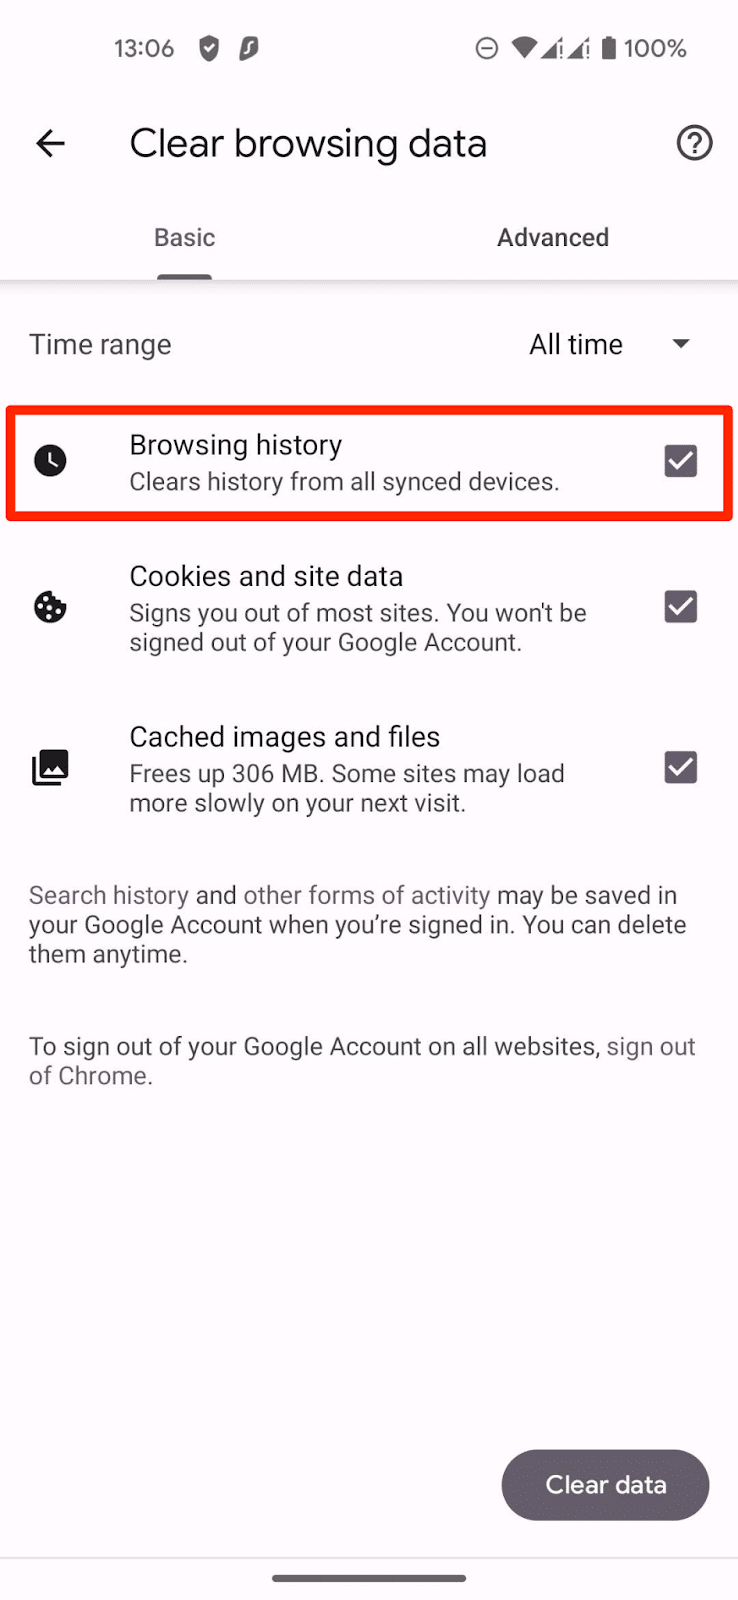 Enable the "Browsing history" box